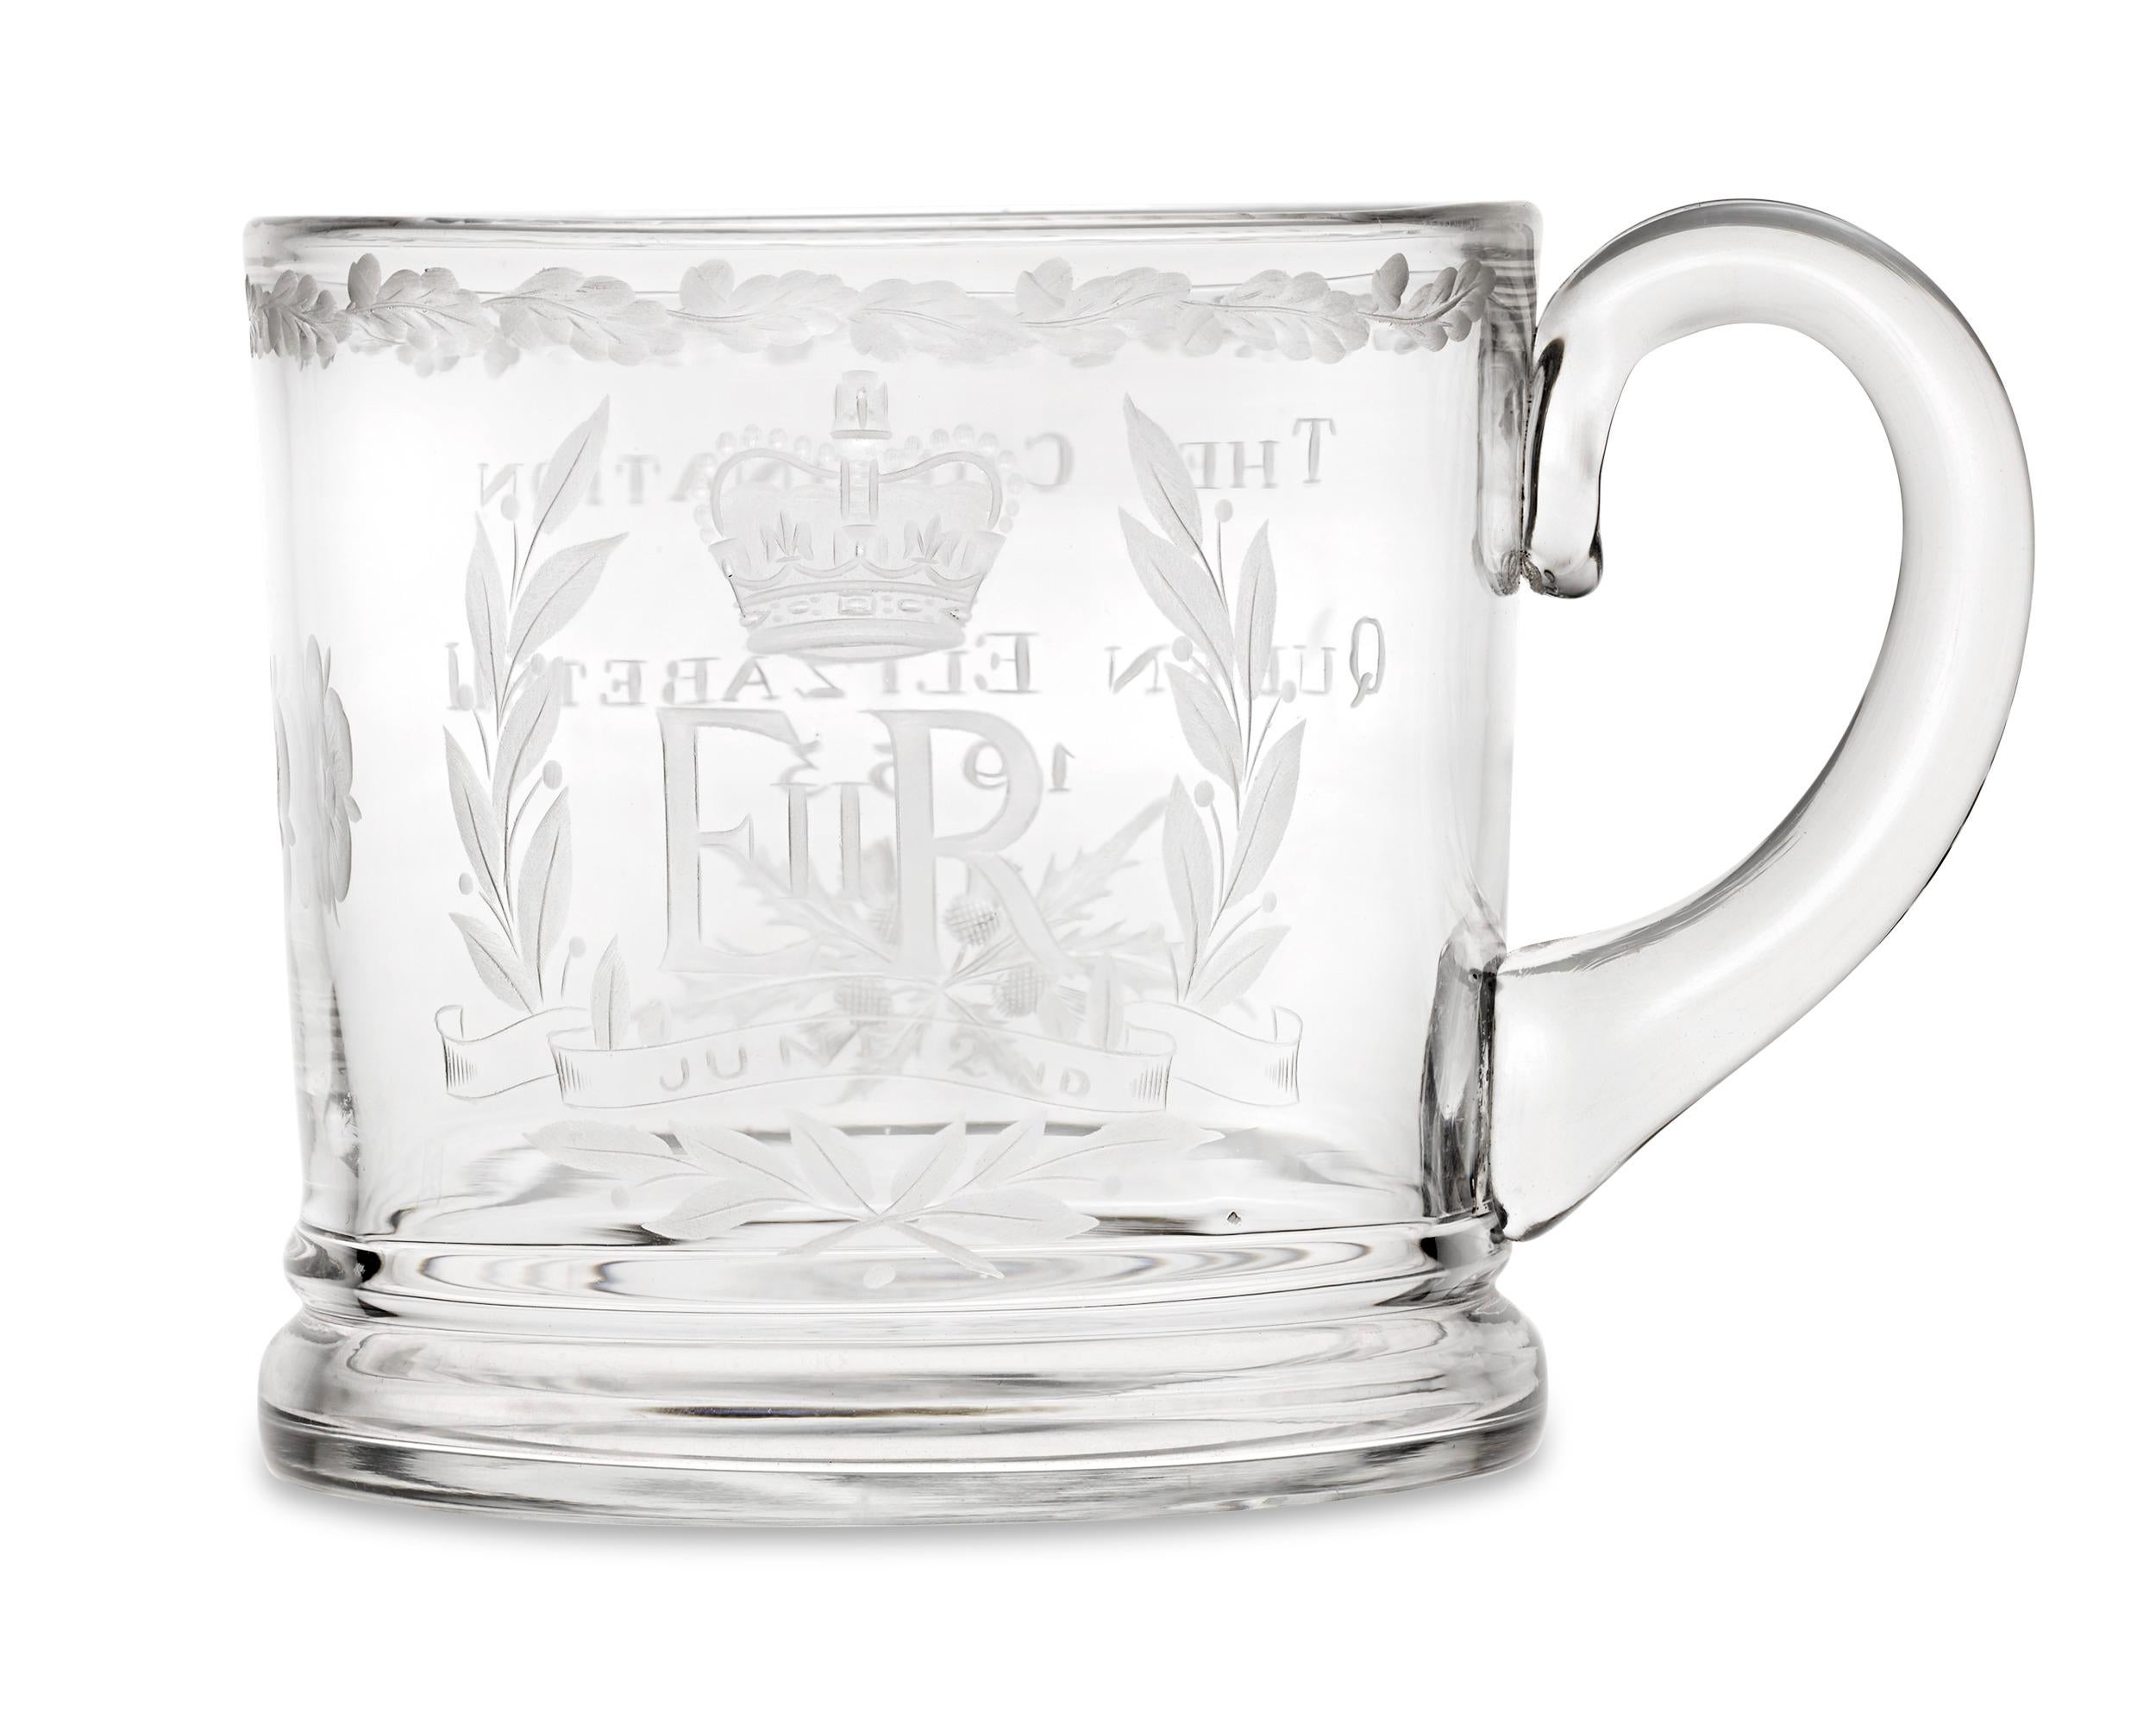 This engraved glass was crafted to commemorate the coronation of Queen Elizabeth II. Sixteen years following the coronation of her father, King George VI, the official coronation of Queen Elizabeth II represented a fascinating mix of tradition and